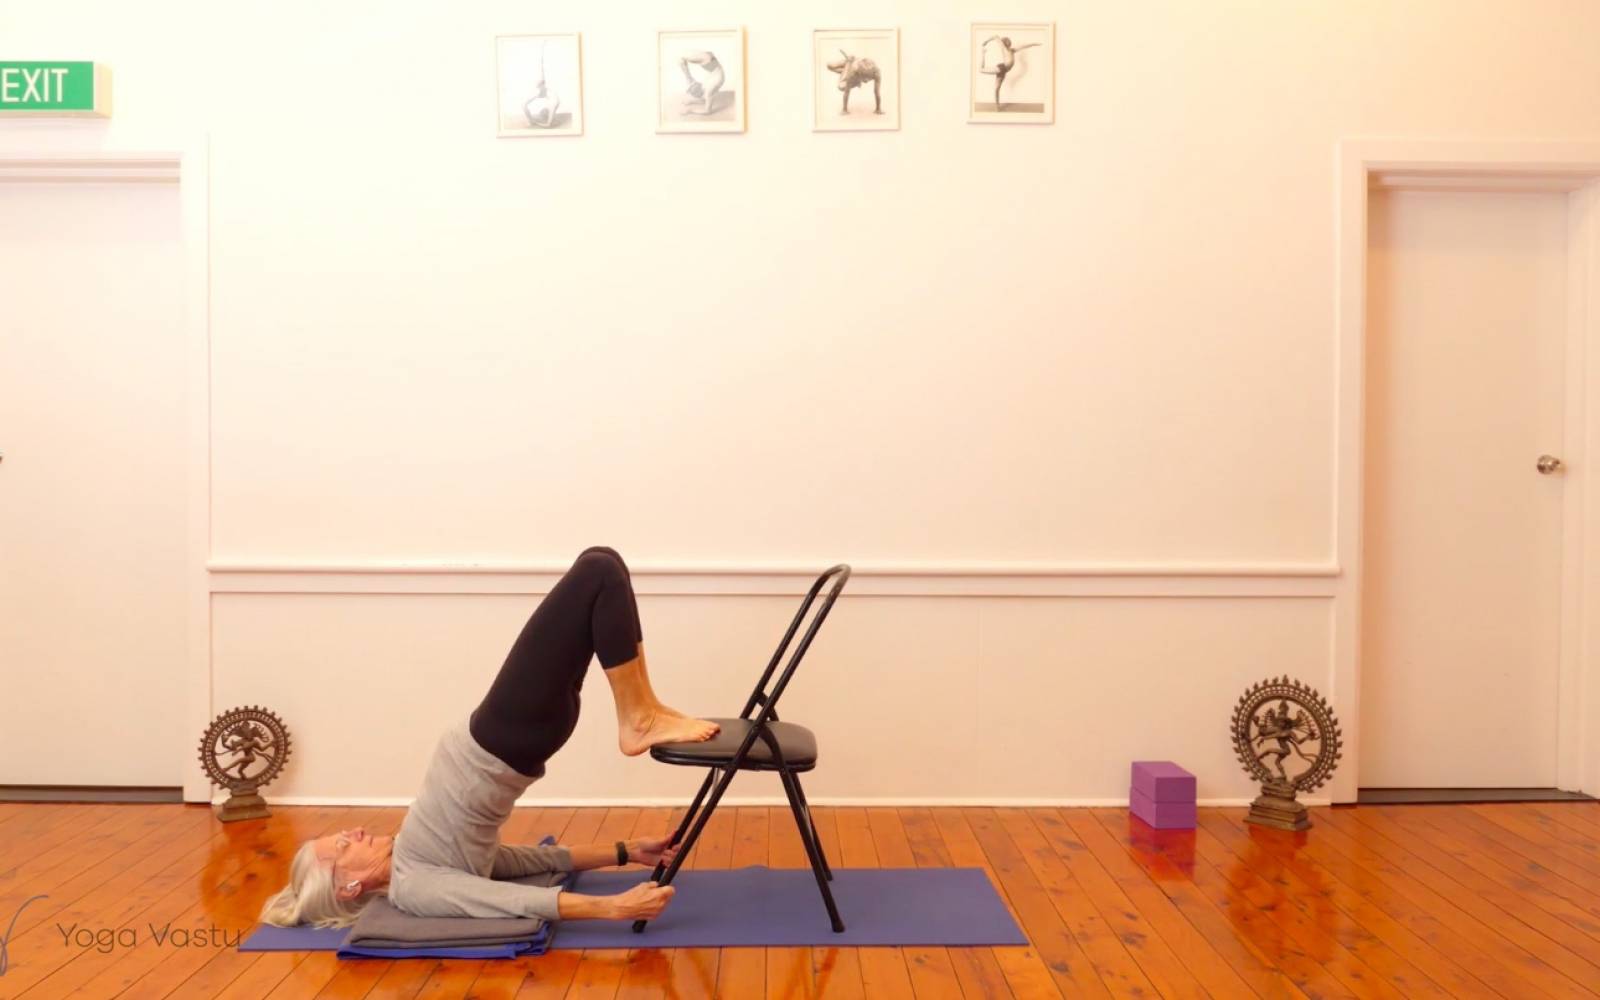 Working From Home? This Yoga Sequence is For You. - yogawithpragya